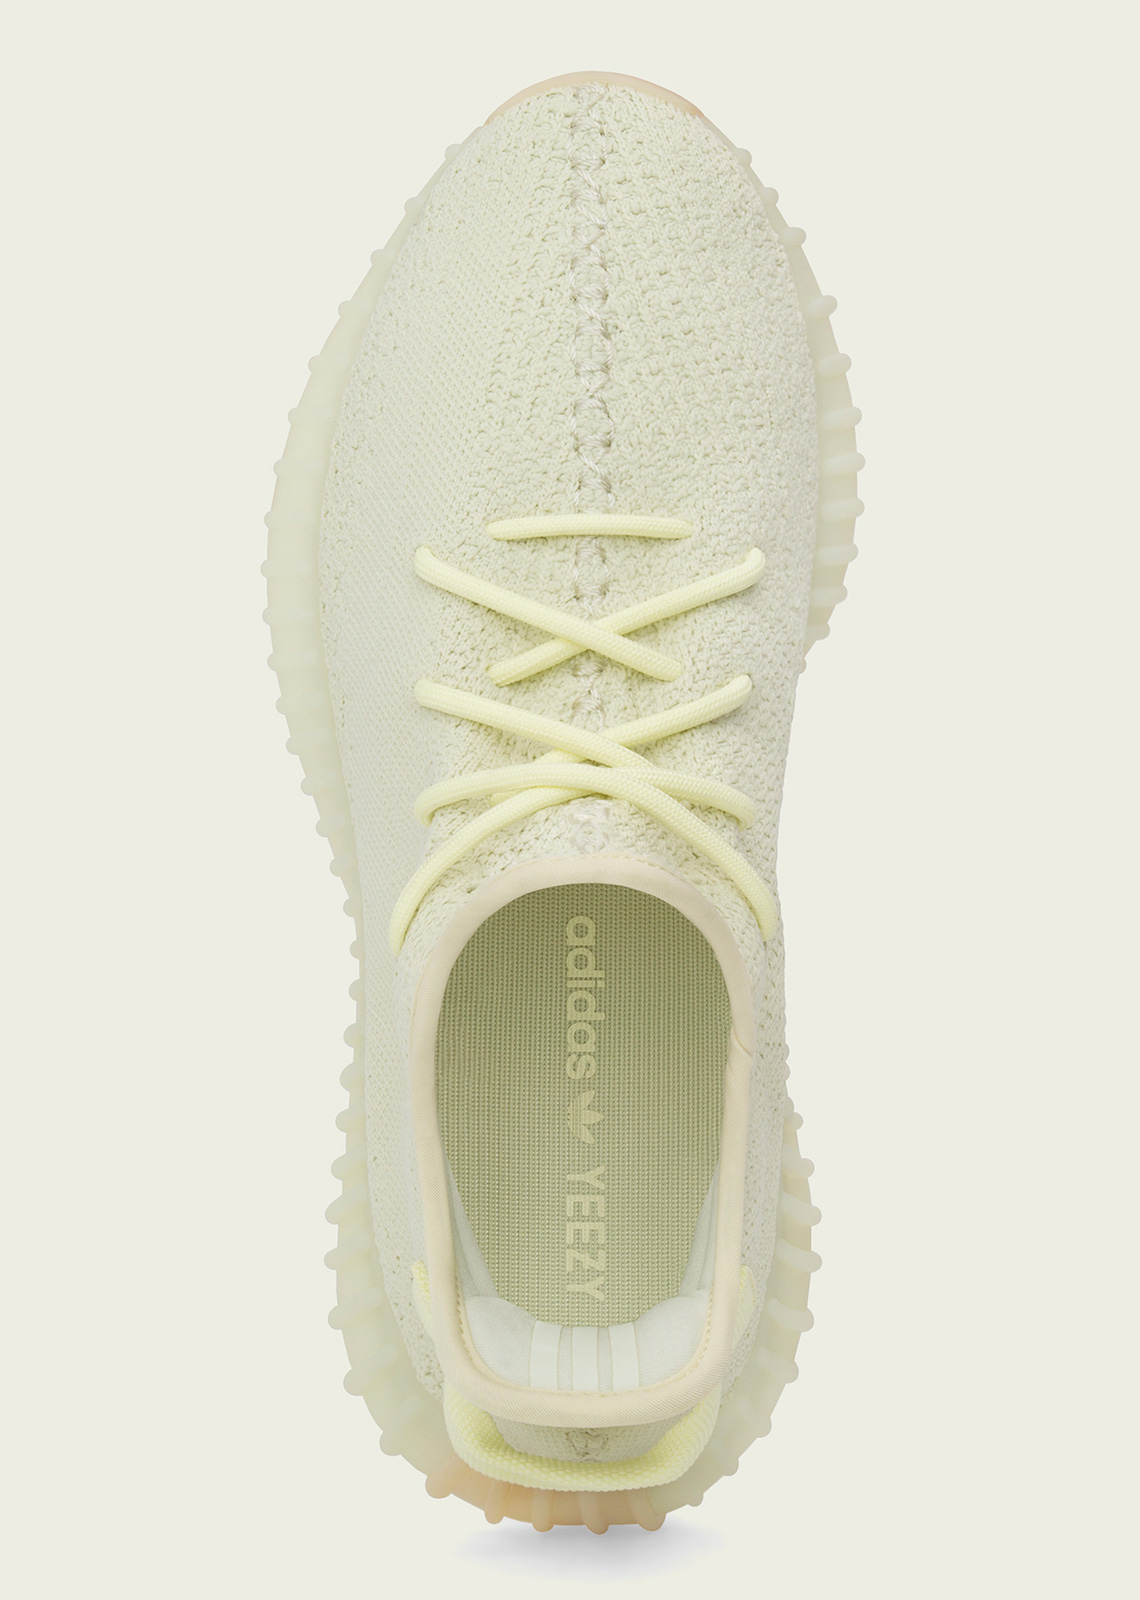 Yeezy Boost 350 v2 Butter Yellow - Release Info | SneakerNews.com